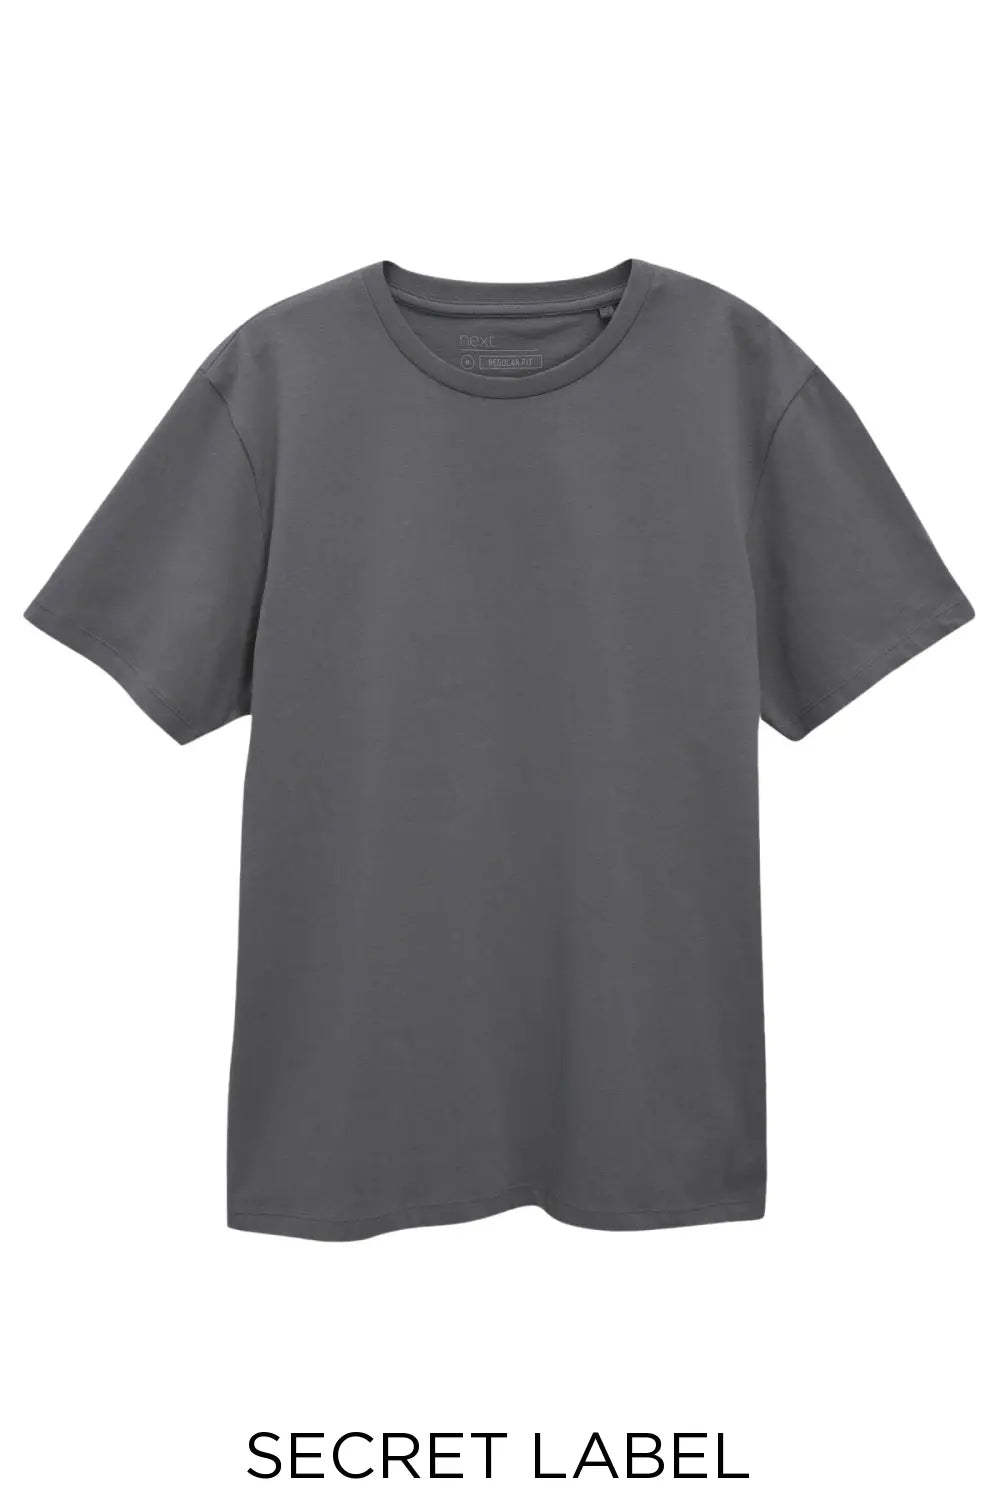 Secret Label Relaxed Fit T Shirt Charcoal / S